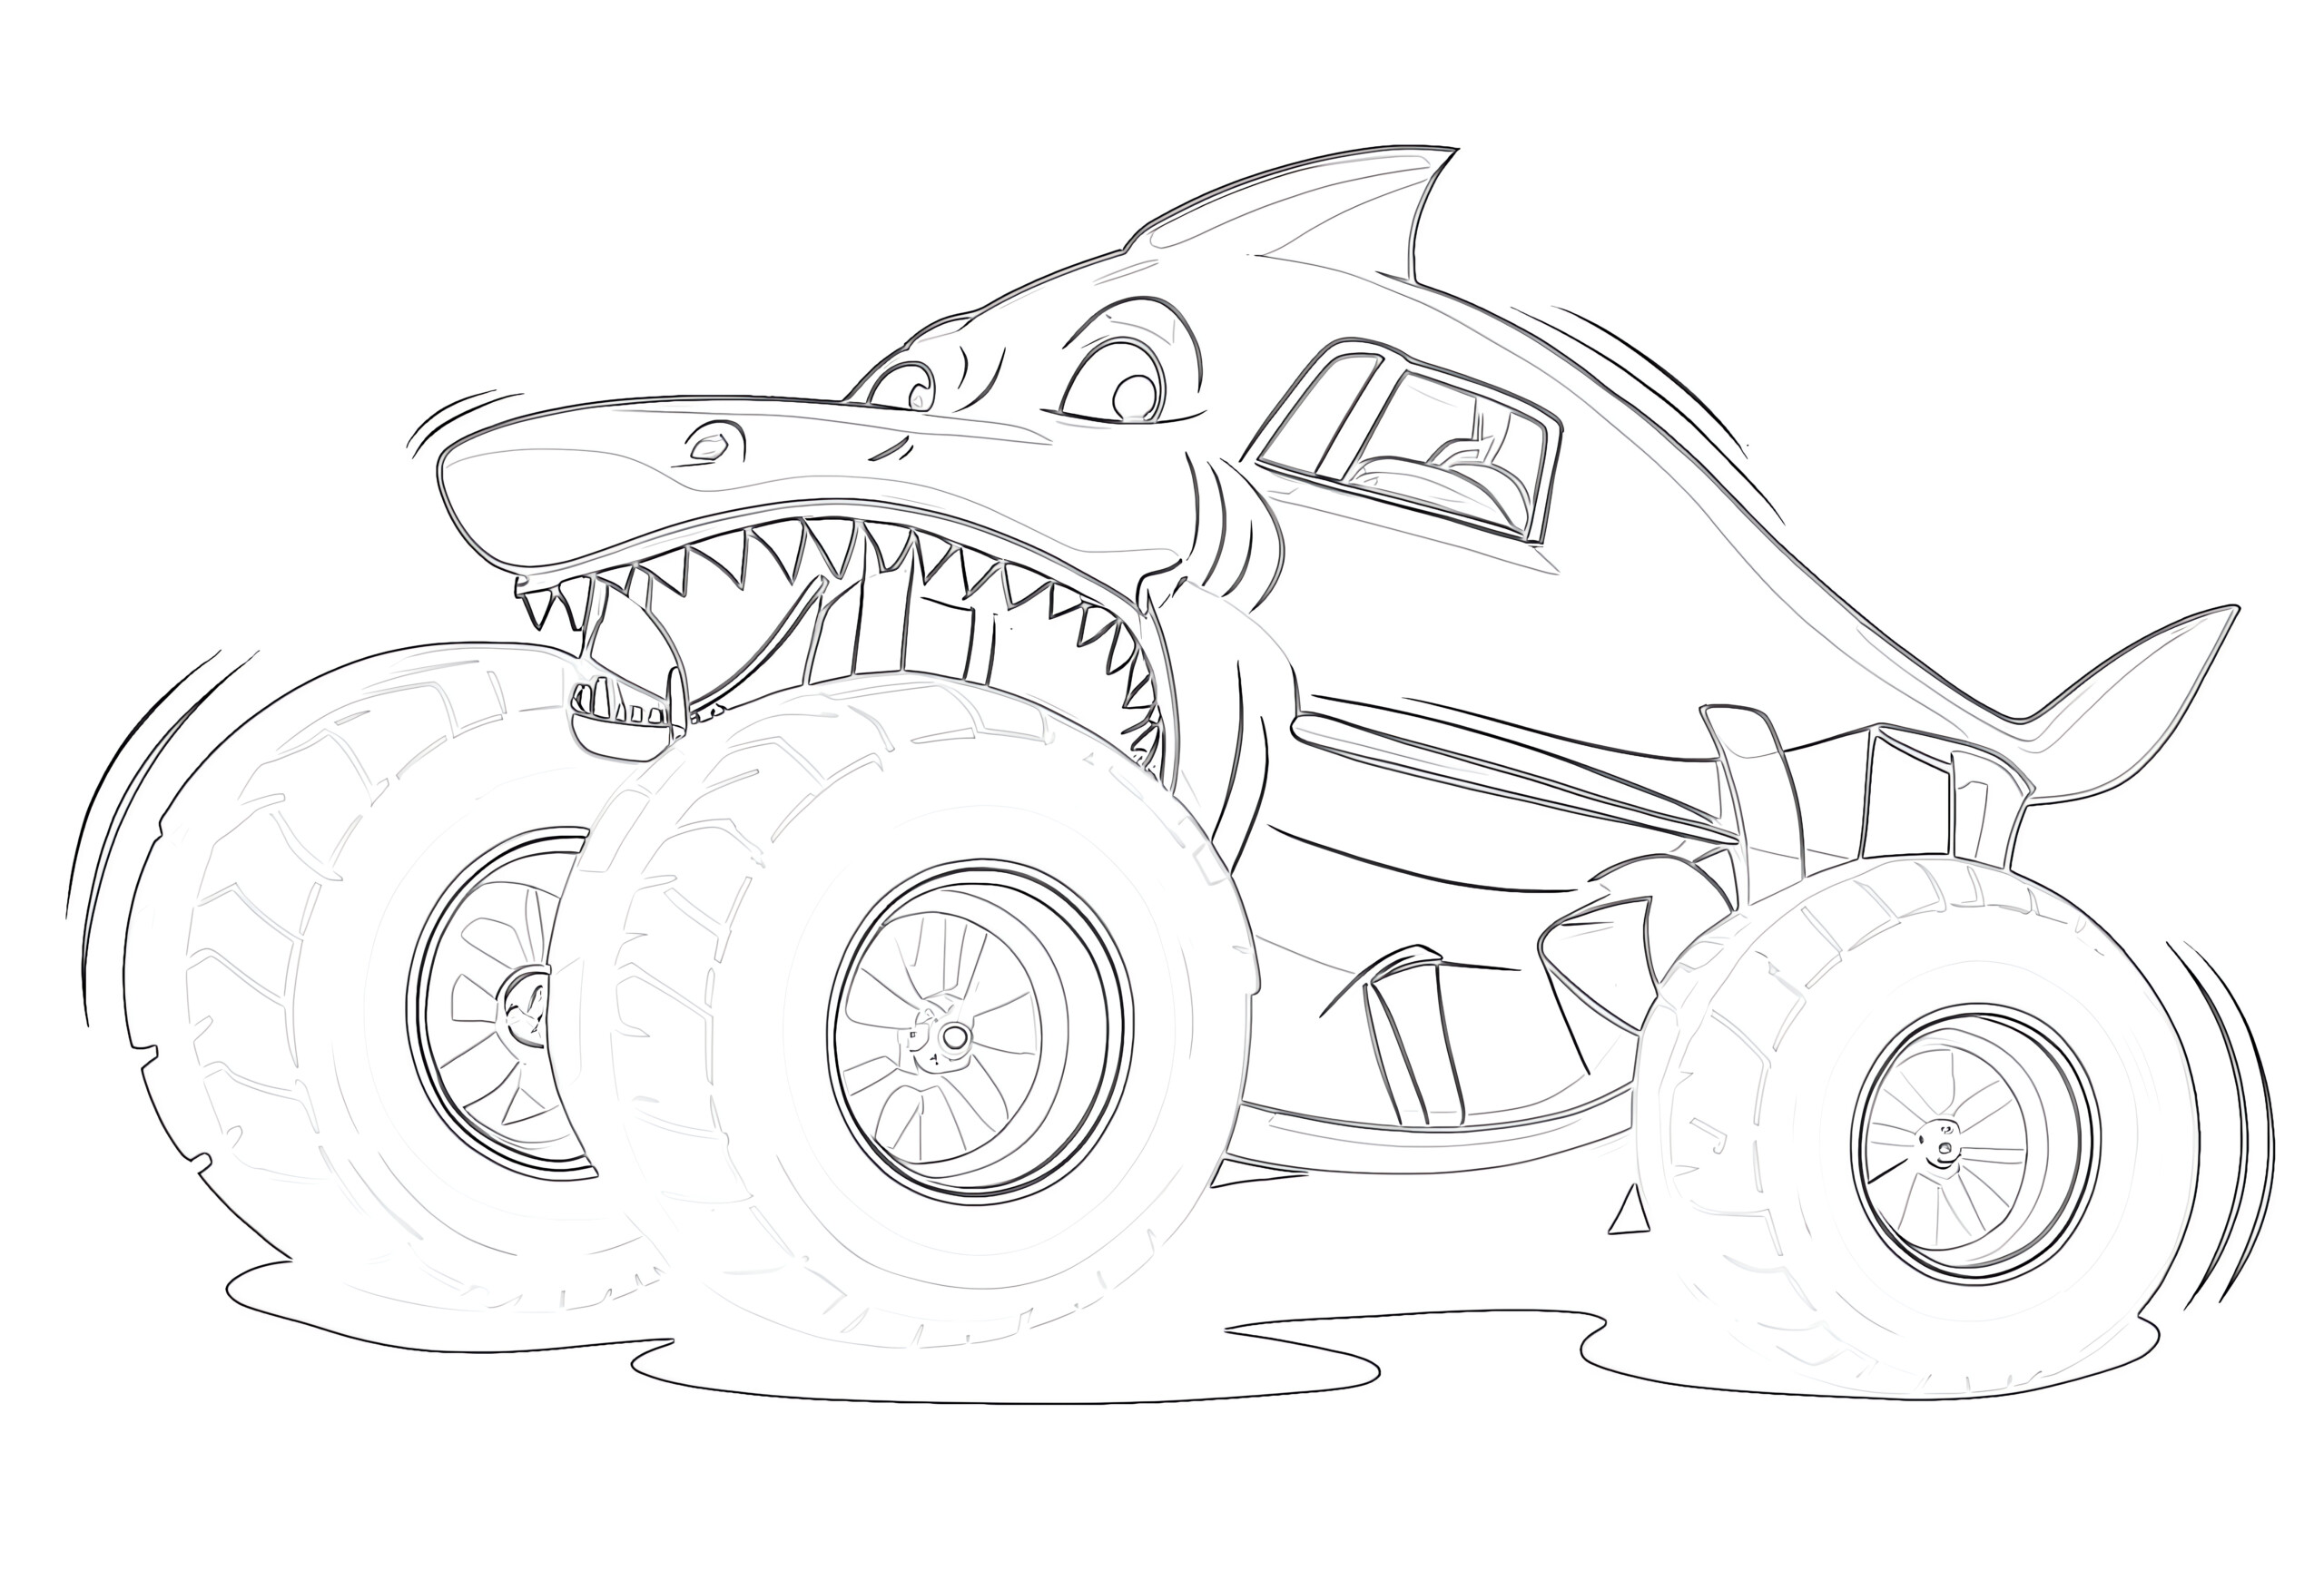 Printable shark monster truck coloring page